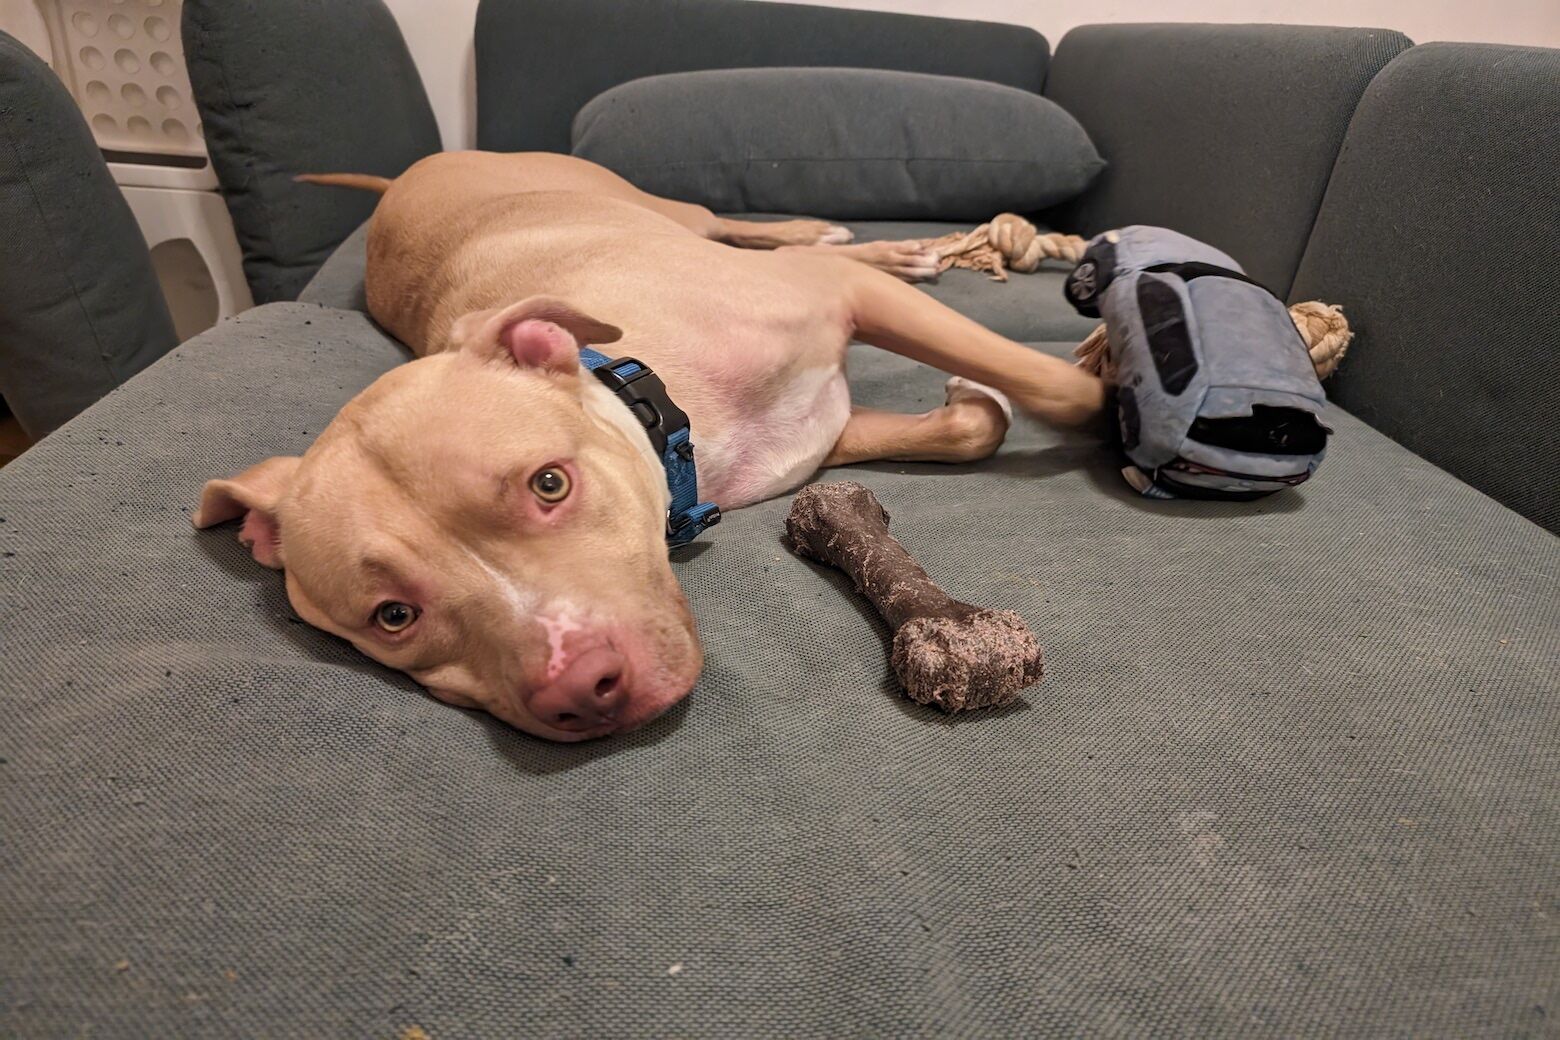 <p>Meet OG!</p>
<p>If you like cuddling with dogs, then OG is the guy for you. All he wants in life is to curl up in your lap (his size doesn&#8217;t matter – he will find a way!). His foster parent says he’s also a polite houseguest and good at apartment living.  At 1 years old, he still has some puppy energy, but he’s quickly learned basic commands like “sit and “stay,” and he’s already crate and house trained. We’d love to help him find a new home where he can enjoy all his favorite things: walks, scratches behind his ears, treats, and snuggles on the couch. Is OG the loyal companion you’ve been looking for? To learn more, visit <a href="http://www.humanerescuealliance.org/dogs">www.humanerescuealliance.org/dogs</a>.</p>
